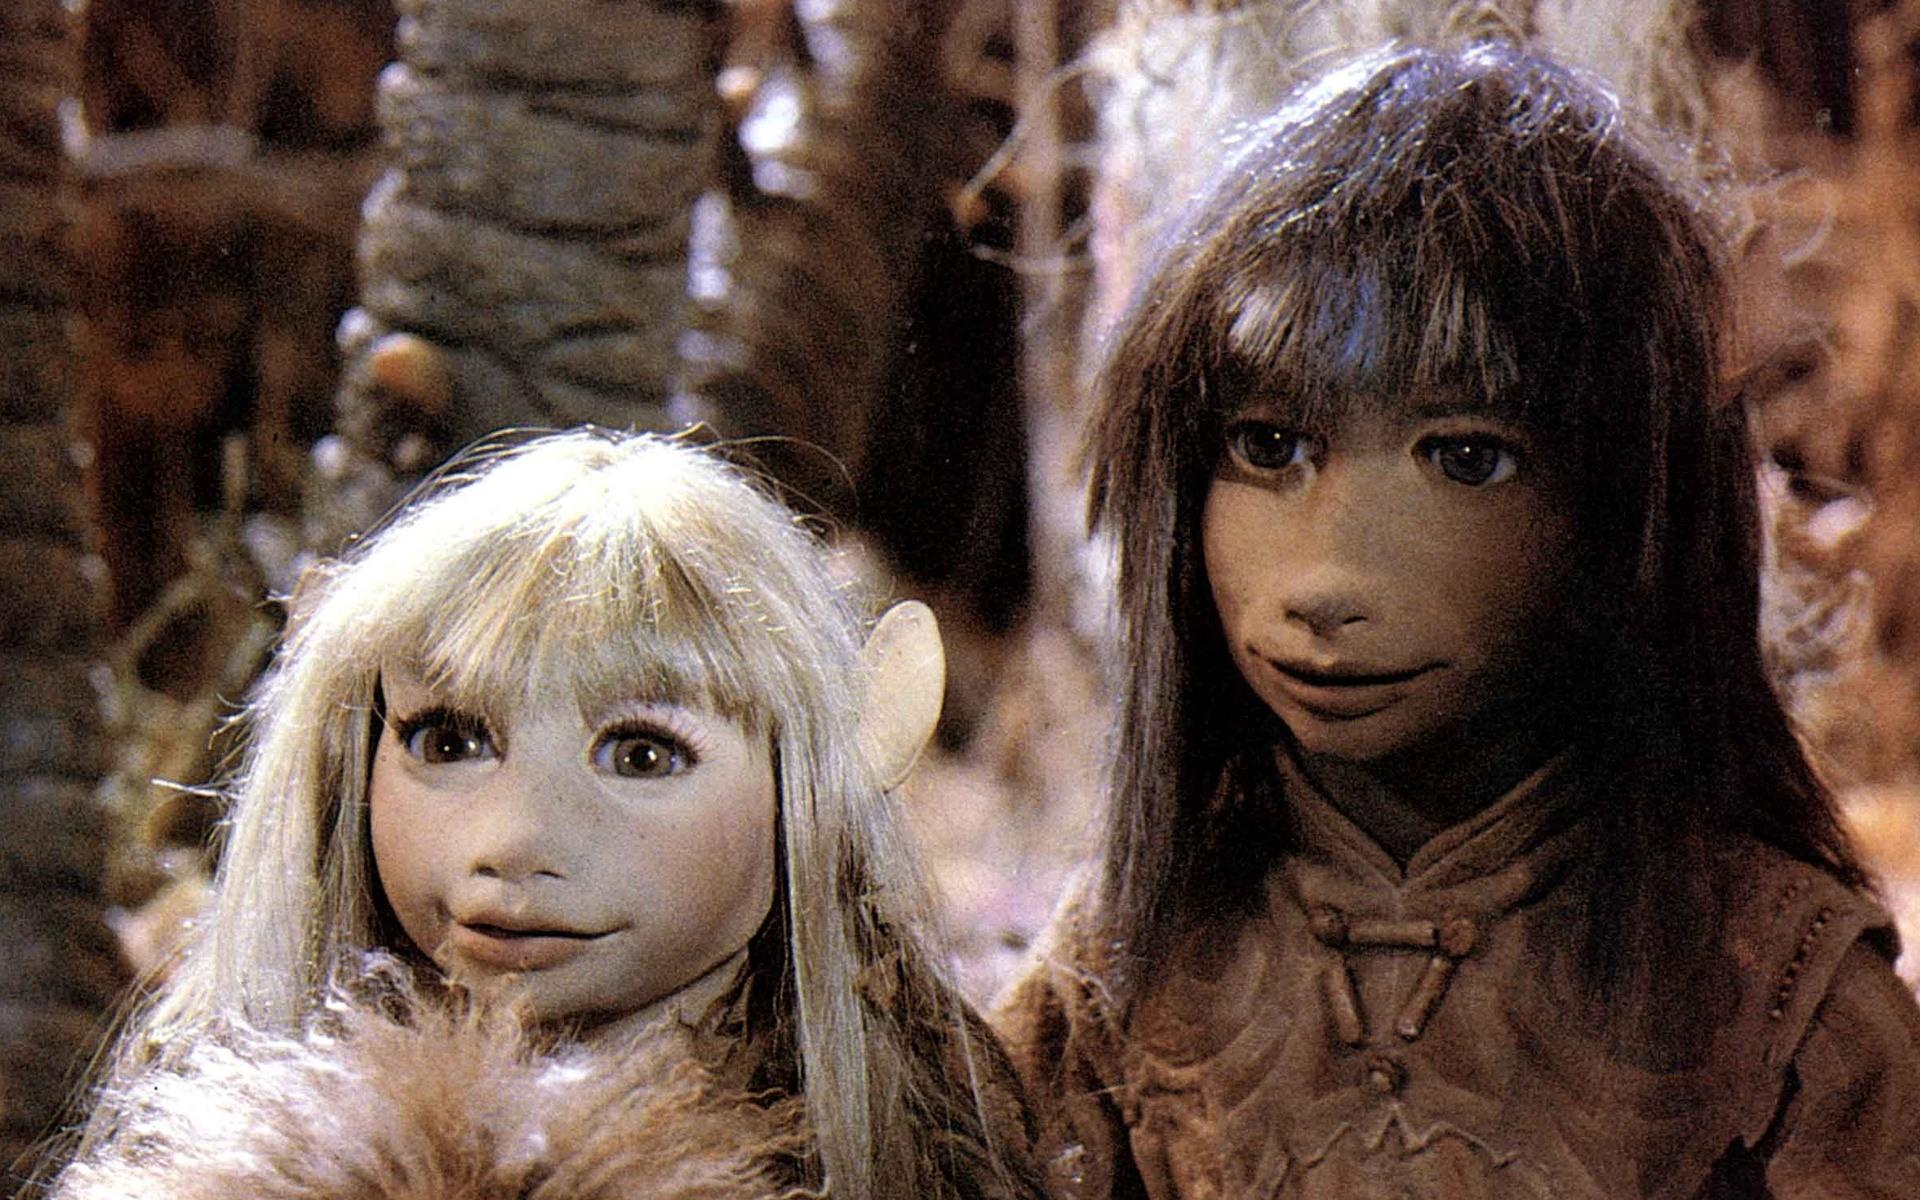 New trailer offers glimpse of Netflix series The Dark Crystal: Age